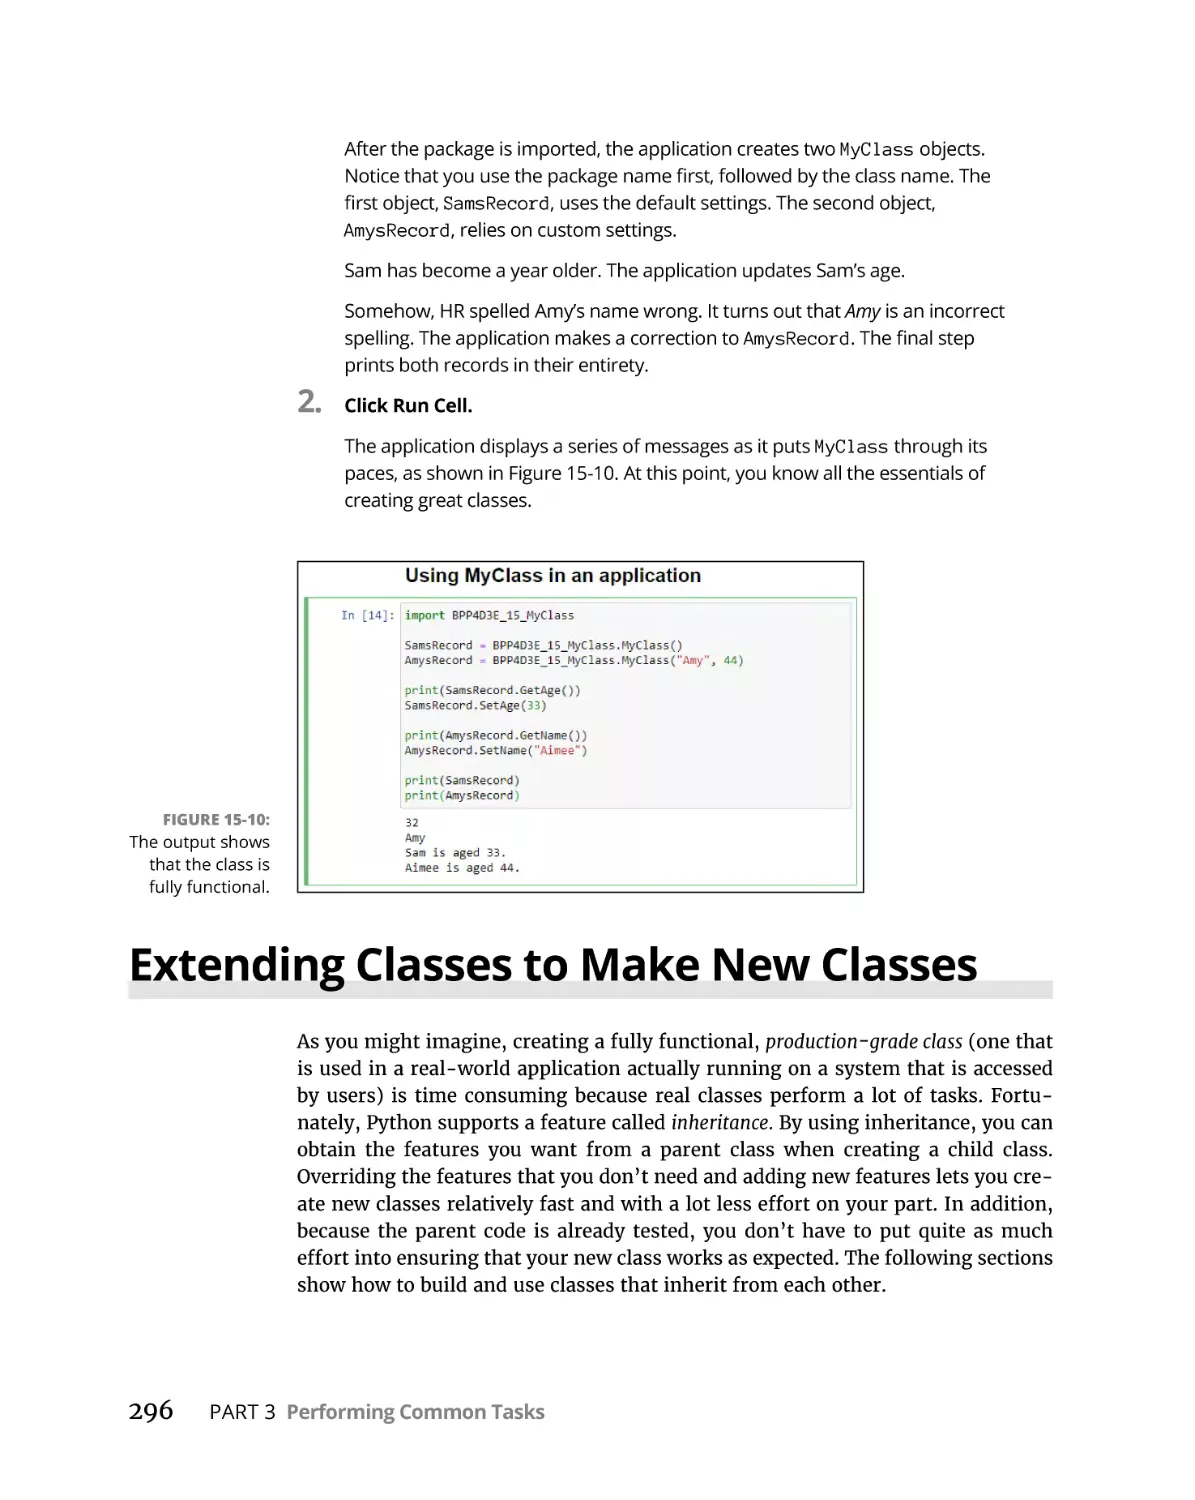 Extending Classes to Make New Classes